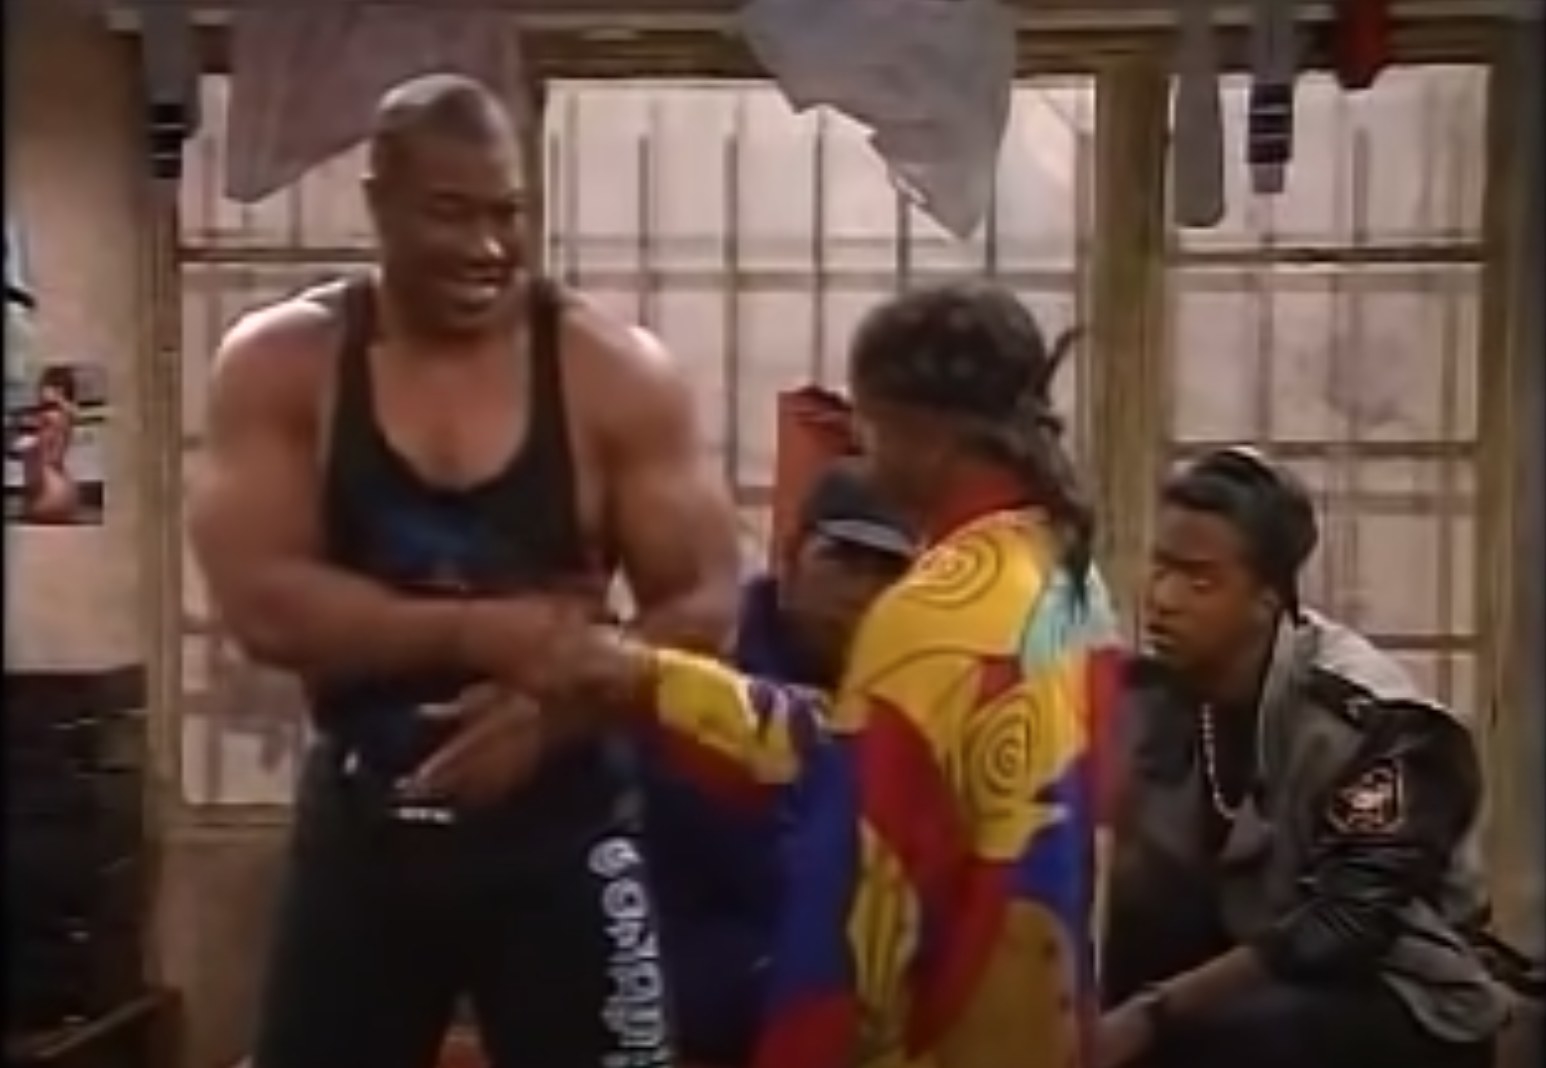 Carlton playing as a Compton GANGSTER